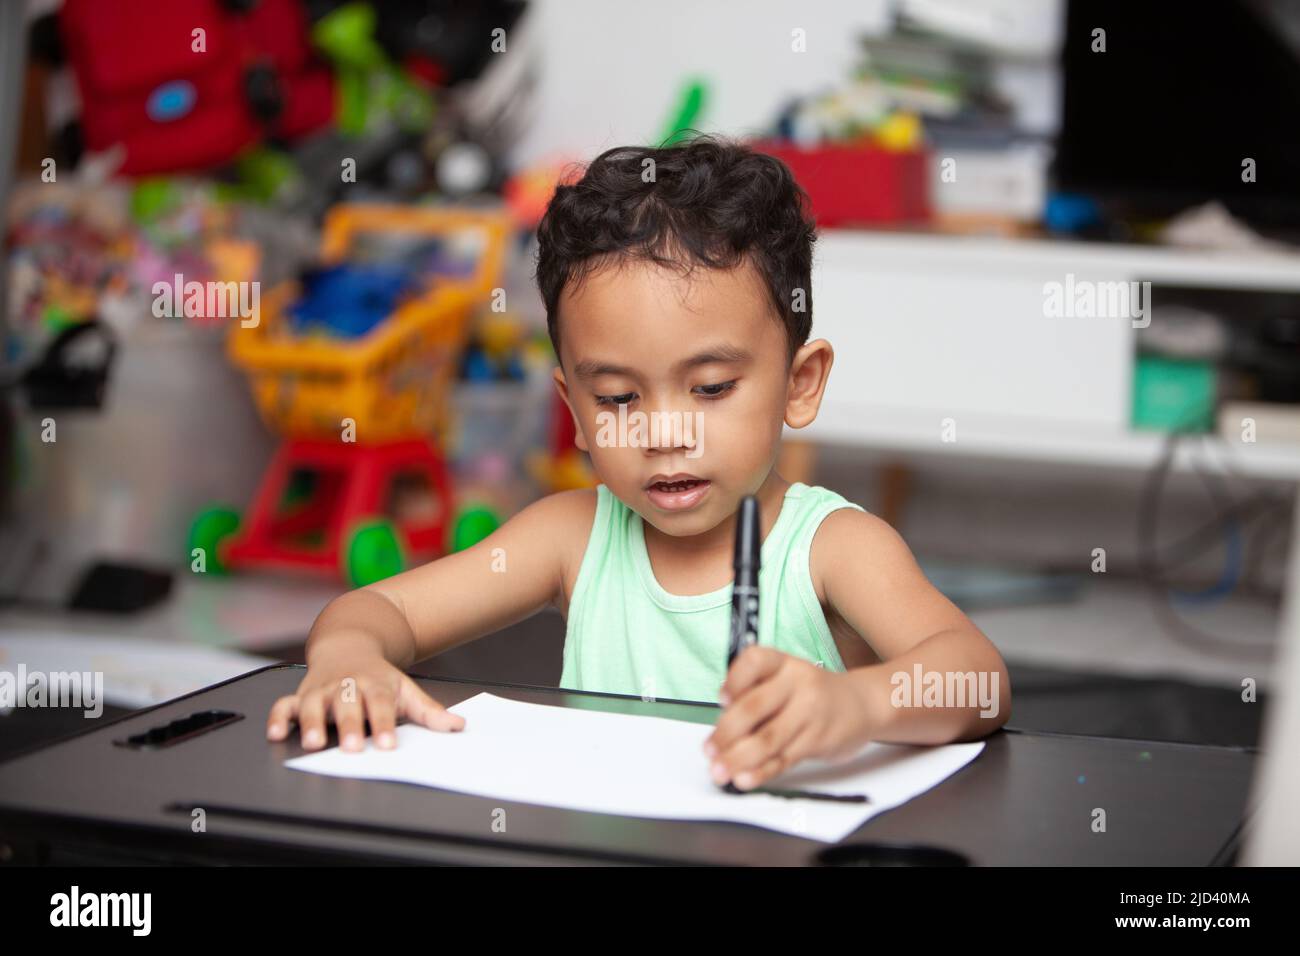 An Indonesian young boy in a light green t-shirt holding a black cryon to color a white sheet of paper on a black table in the living room Stock Photo